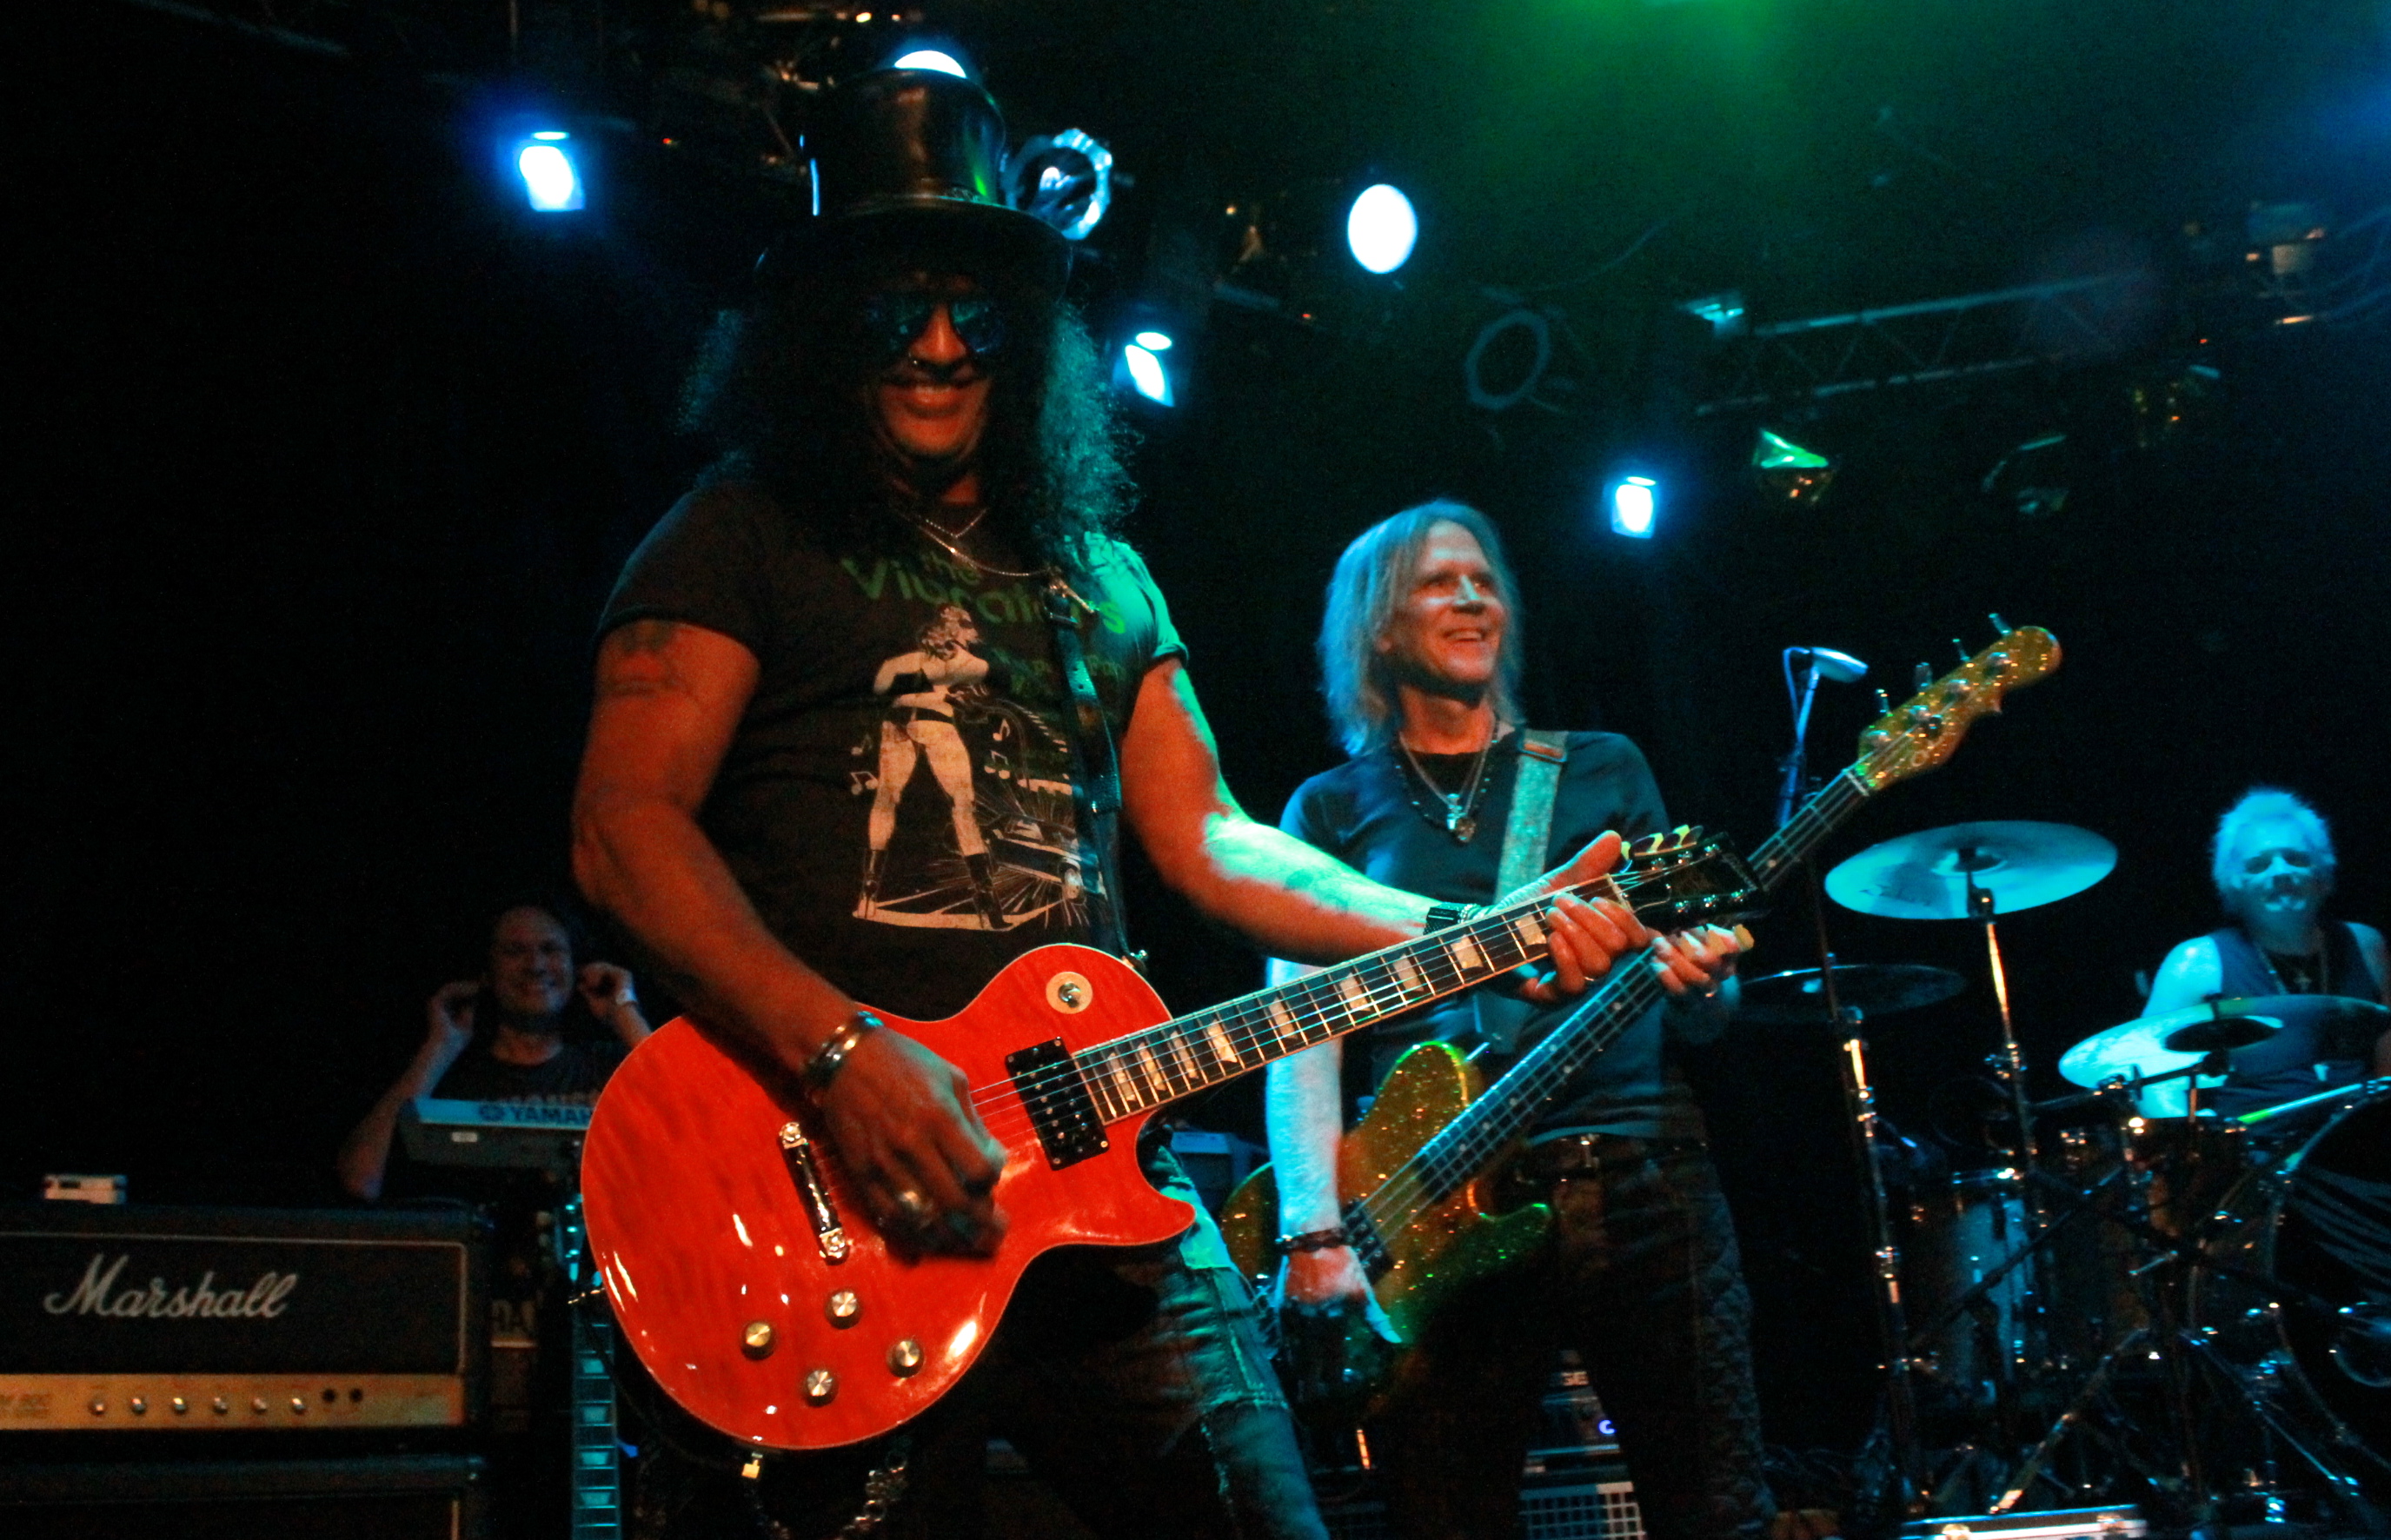 Slash Featuring Myles Kennedy & The Conspirators Live Debut Guns N' Roses "Don't Damn Me"